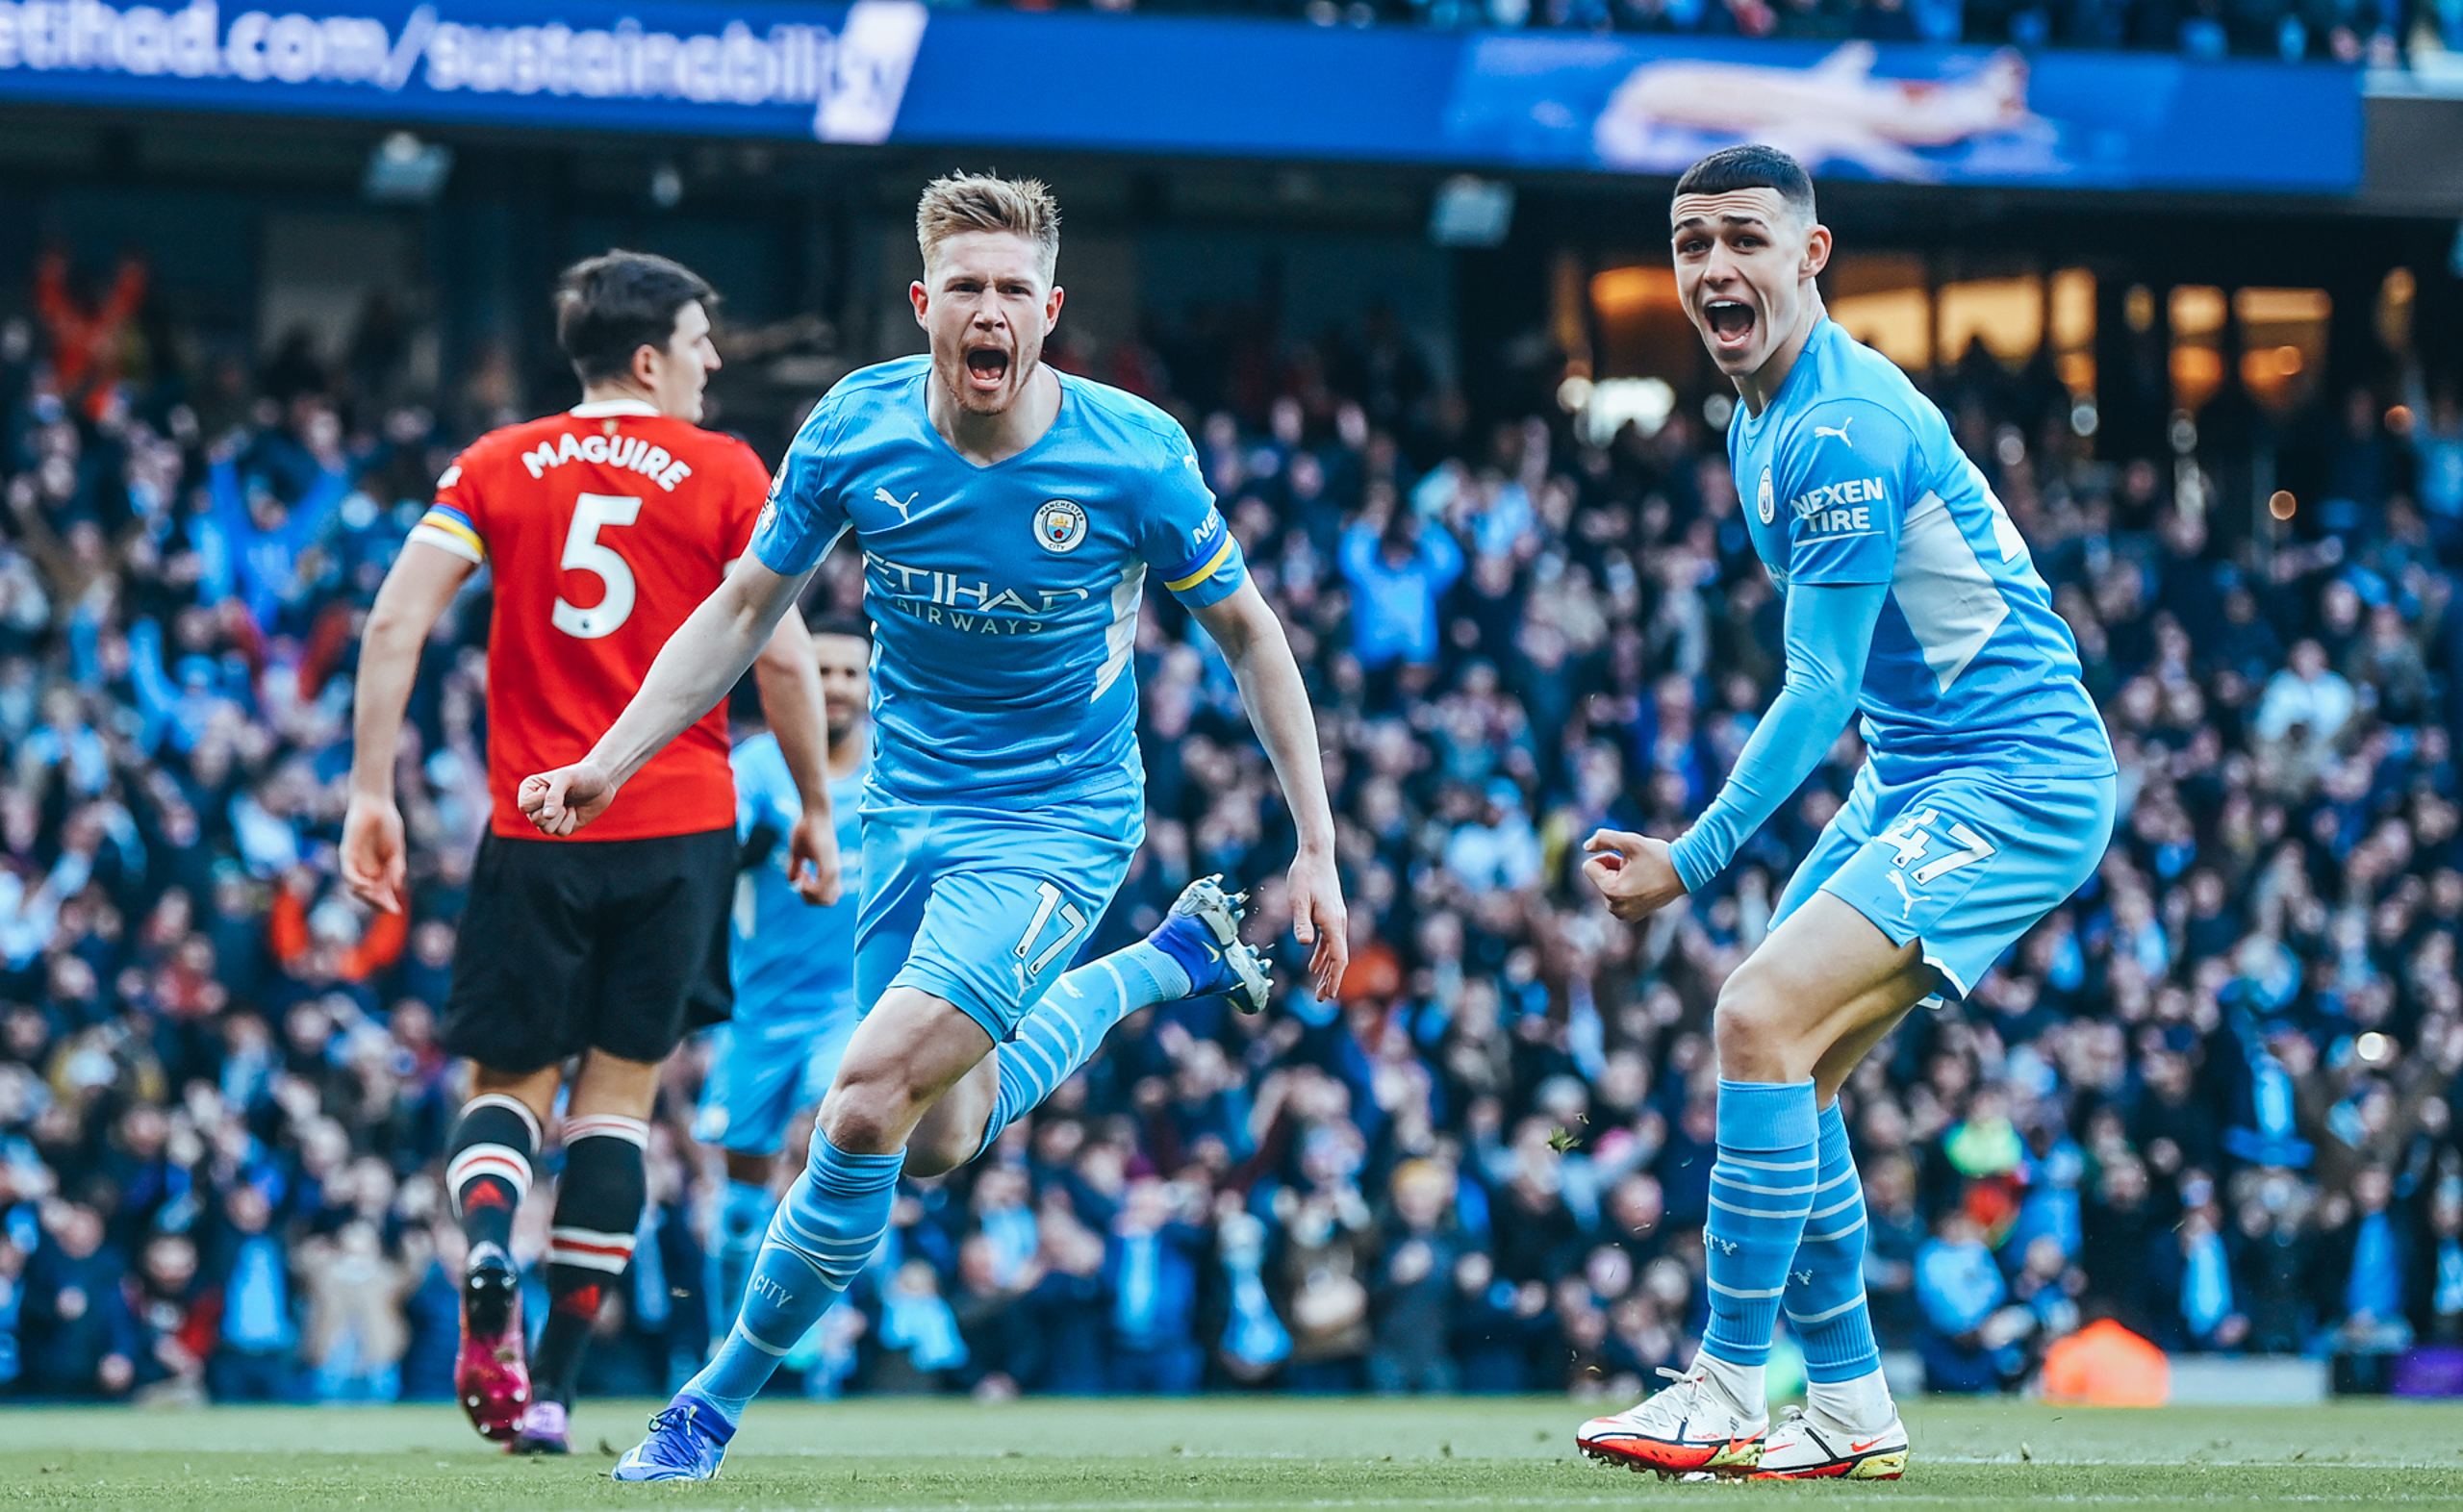 Gallery: Fantastic four in Manchester Derby!